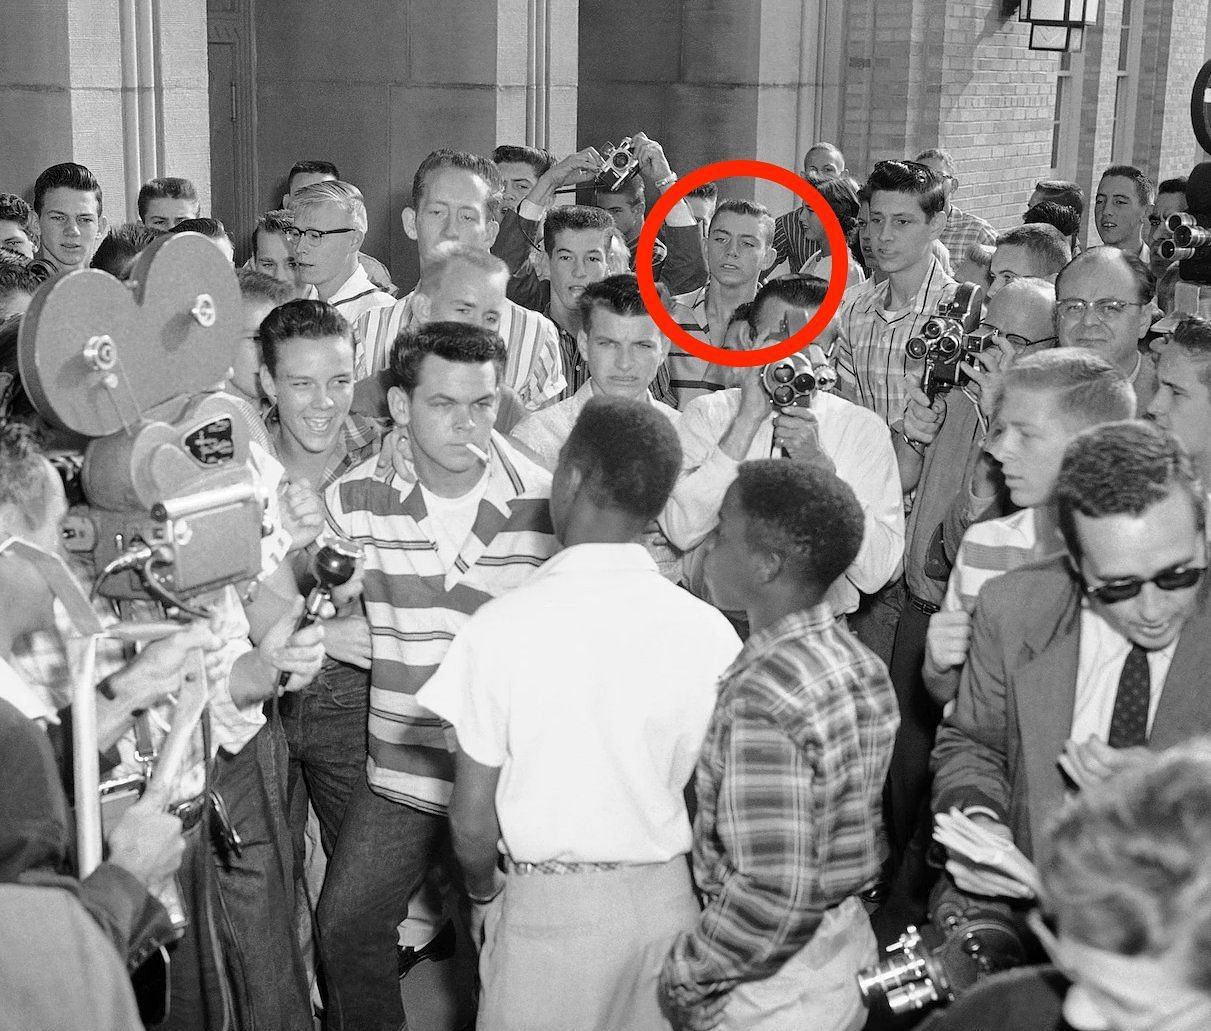 Jerry Jones present at Little Rock protest in 1957 